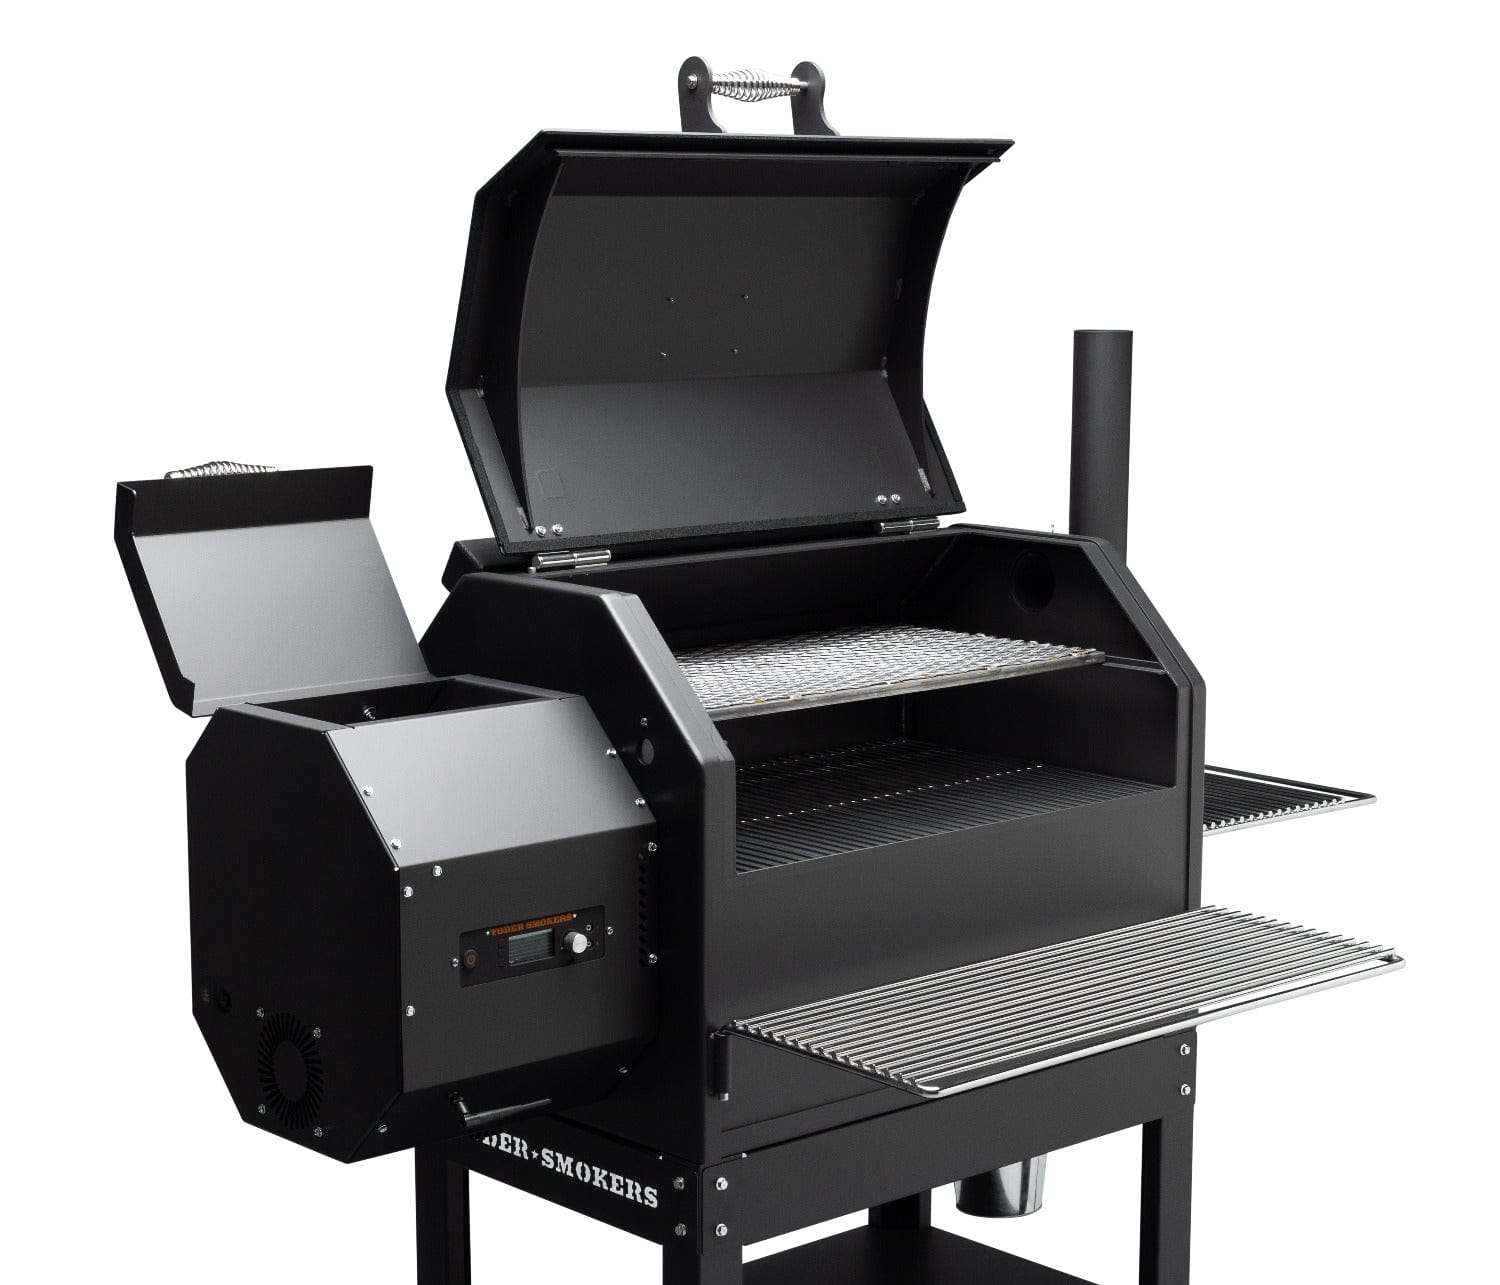 Yoder YS640s Review: High-End USA-Made Pellet Grill - Smoked BBQ Source